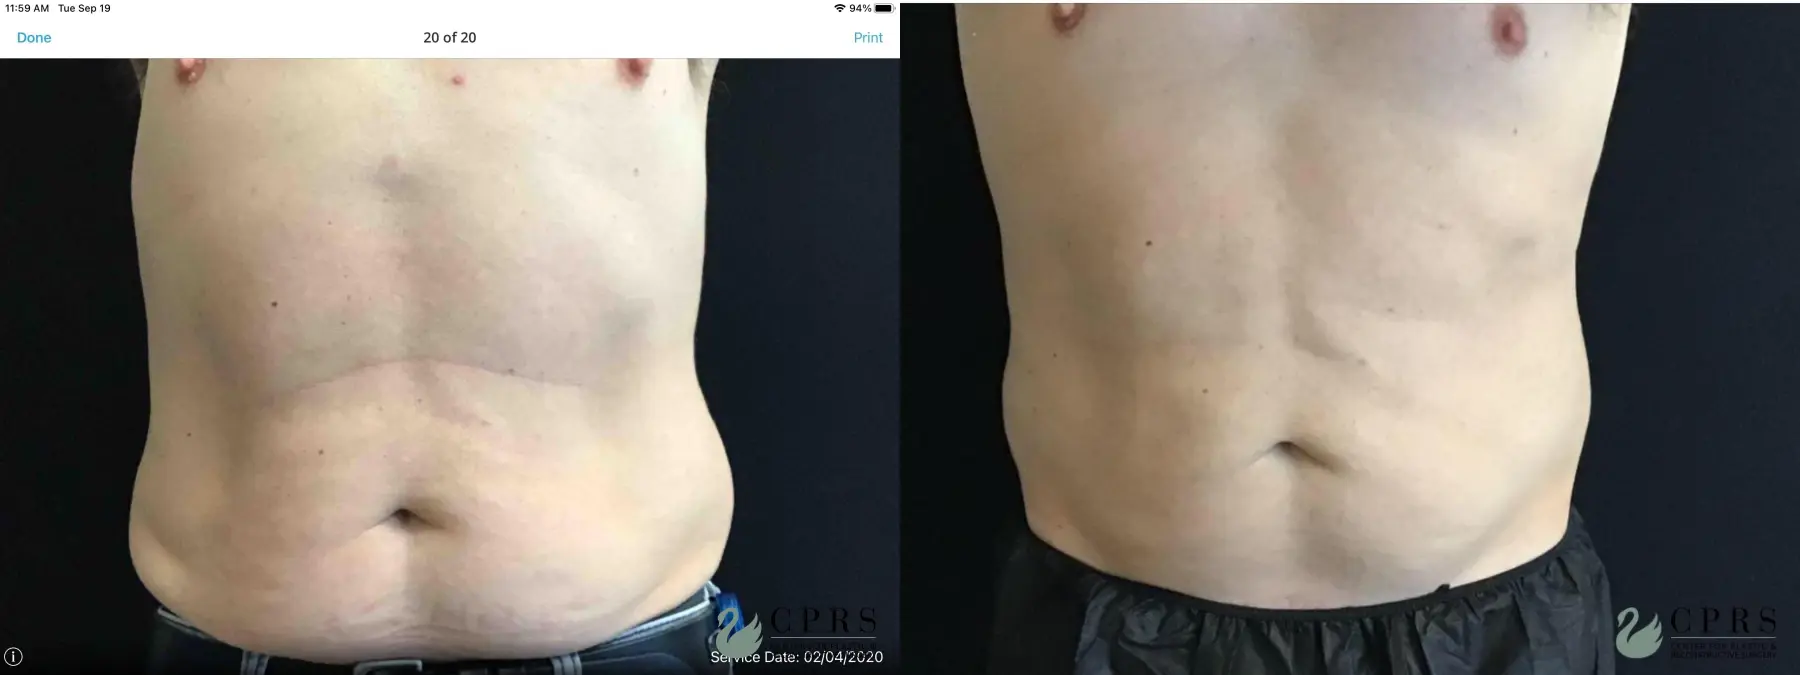 CoolSculpting®: Patient 7 - Before and After 1